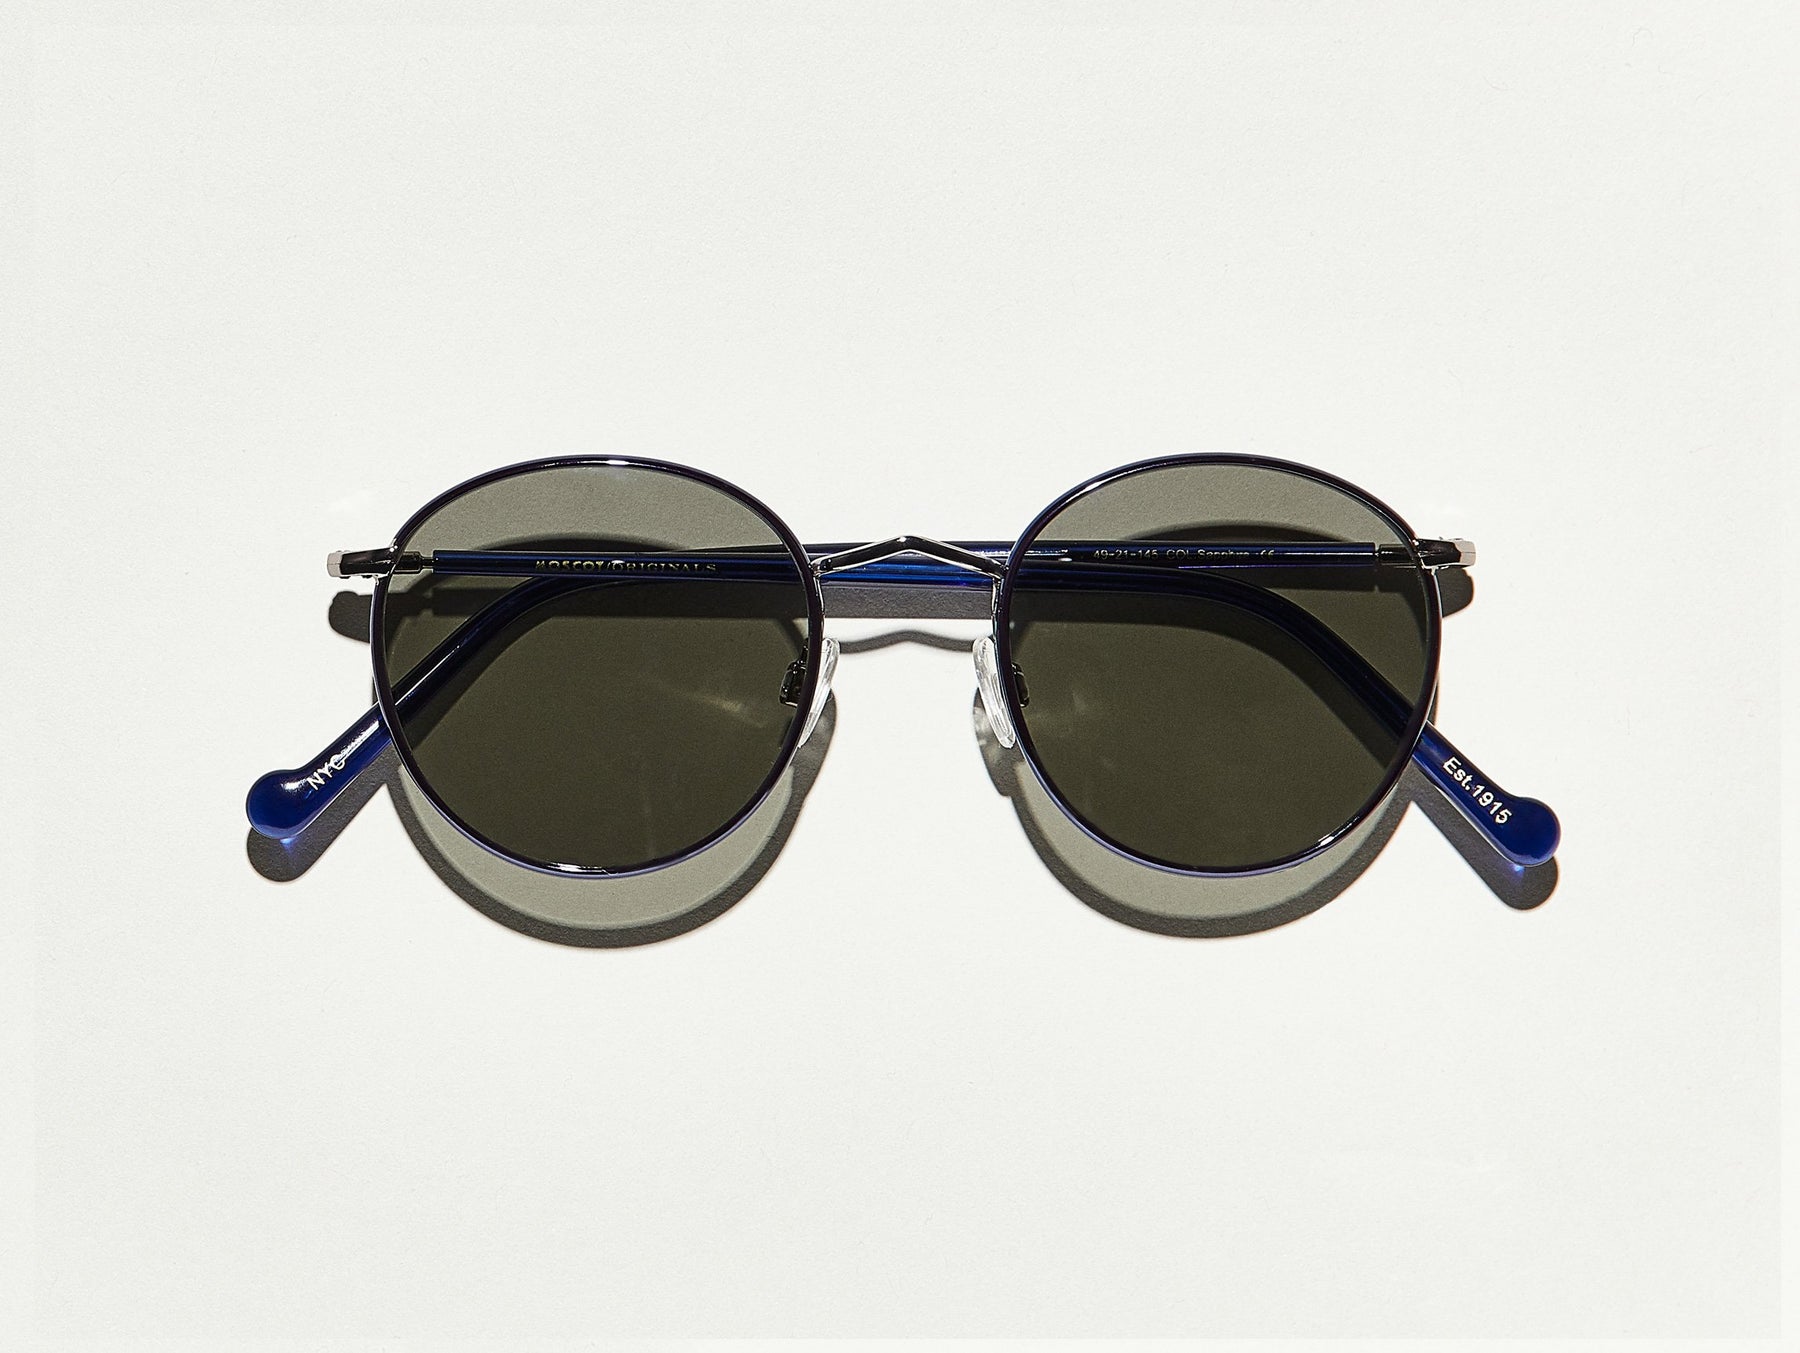 The ZEV SUN in Sapphire/Pewter with Grey Polarized Glass Lenses